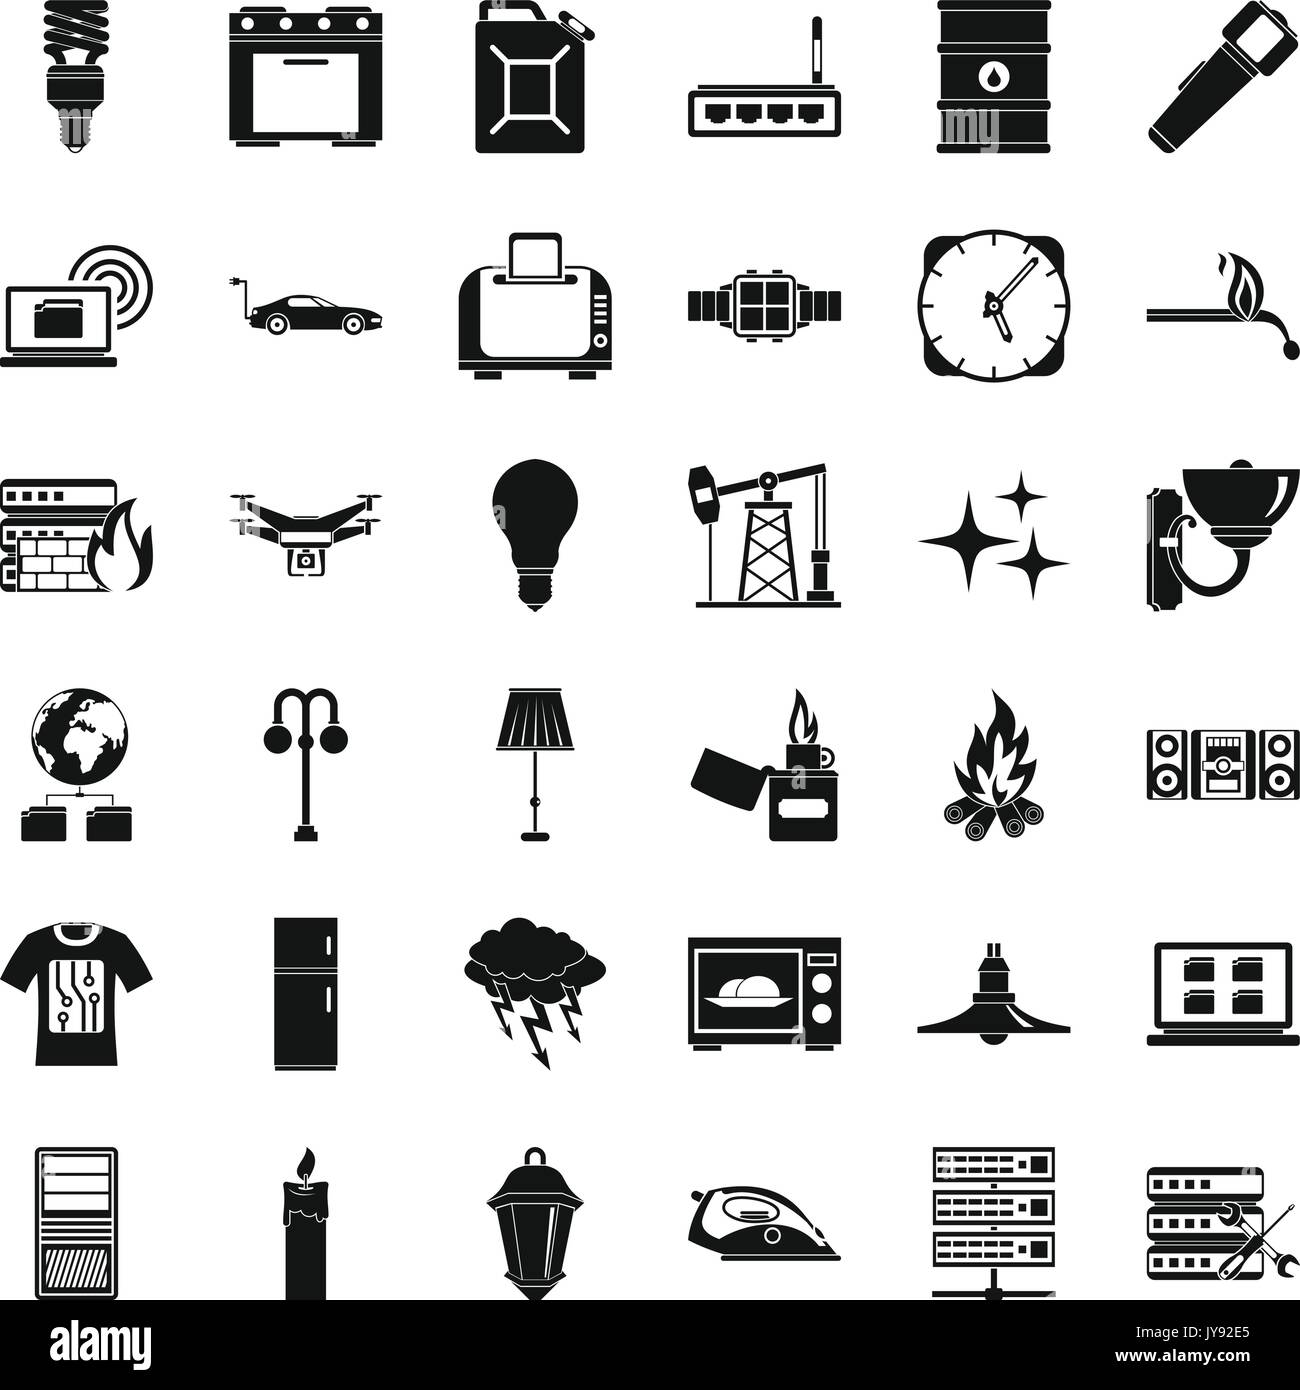 Electricity computer icons set, simple style Stock Vector